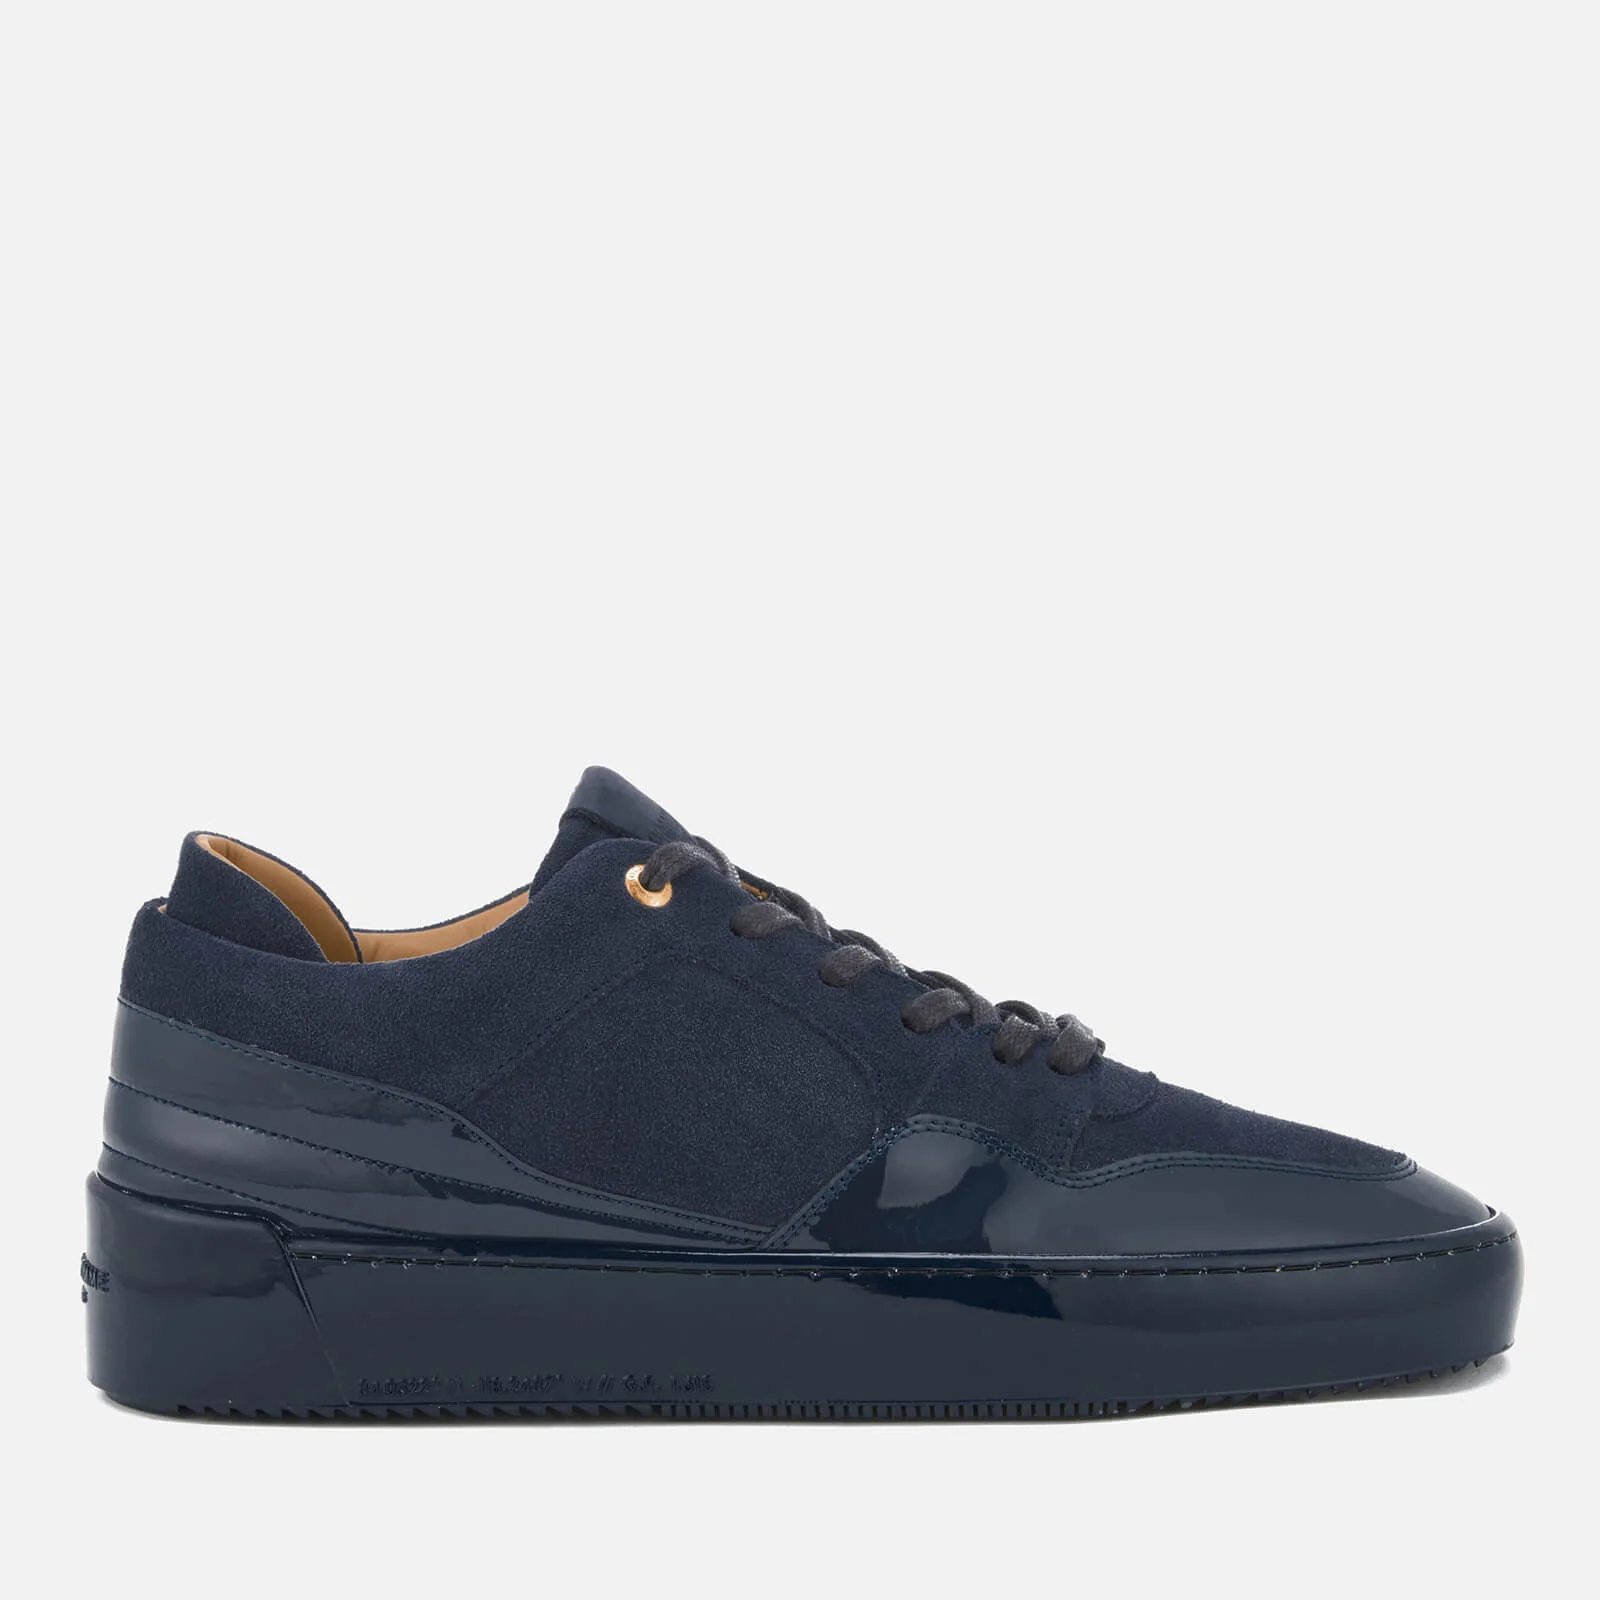 Android Homme Men's Omega Low Suede/Patent Leather Trainers - Navy Image 1